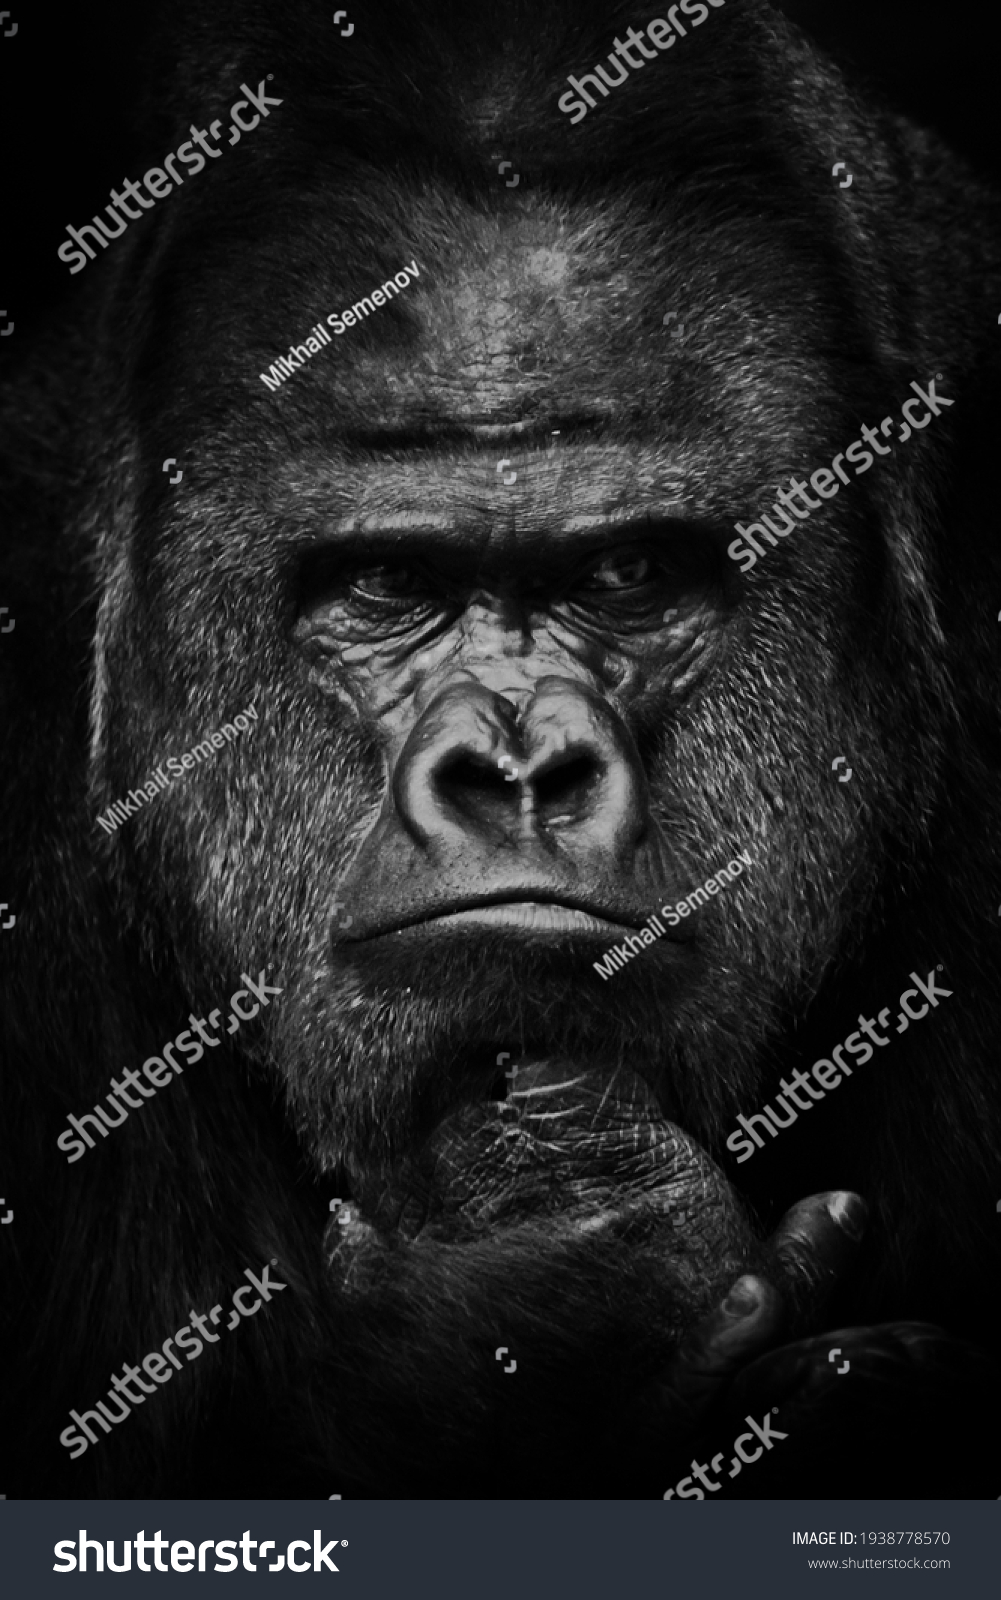 Heavy gaze of strong dominant male gorilla, face close up, black and white photo #1938778570